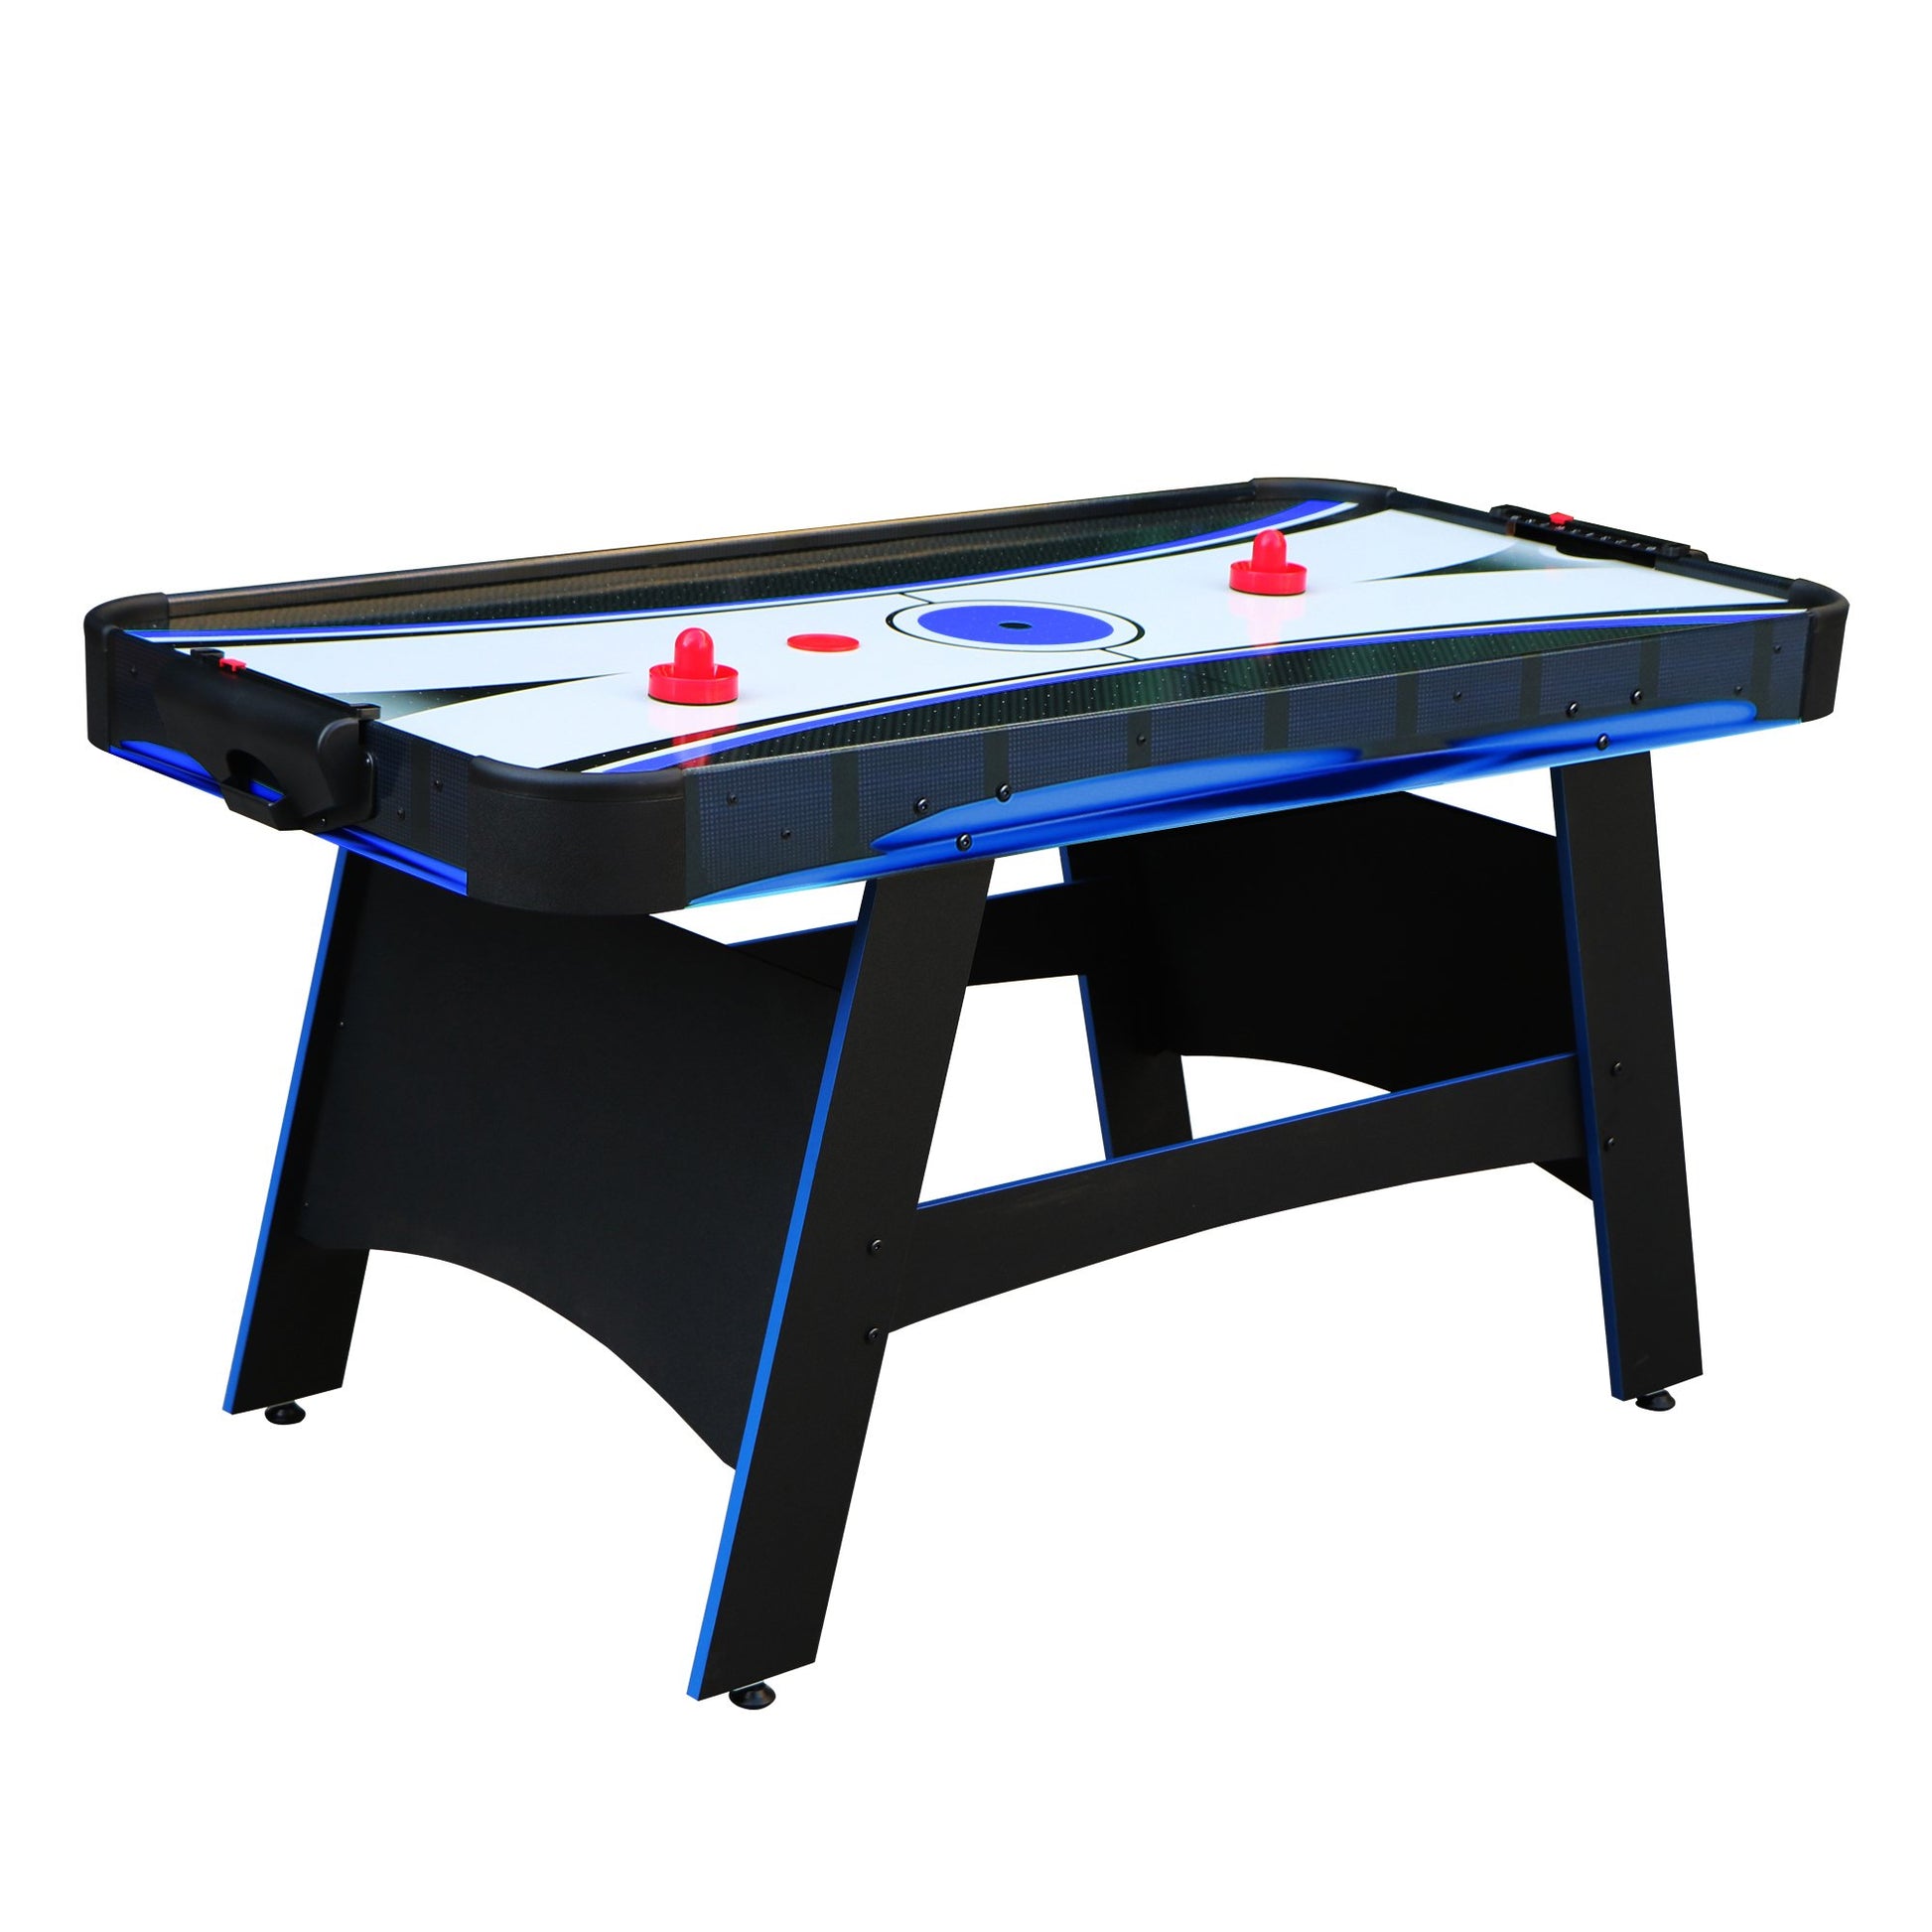 Hathaway Bandit 2 in 1 Multi Game Table 5ft - Gaming Blaze